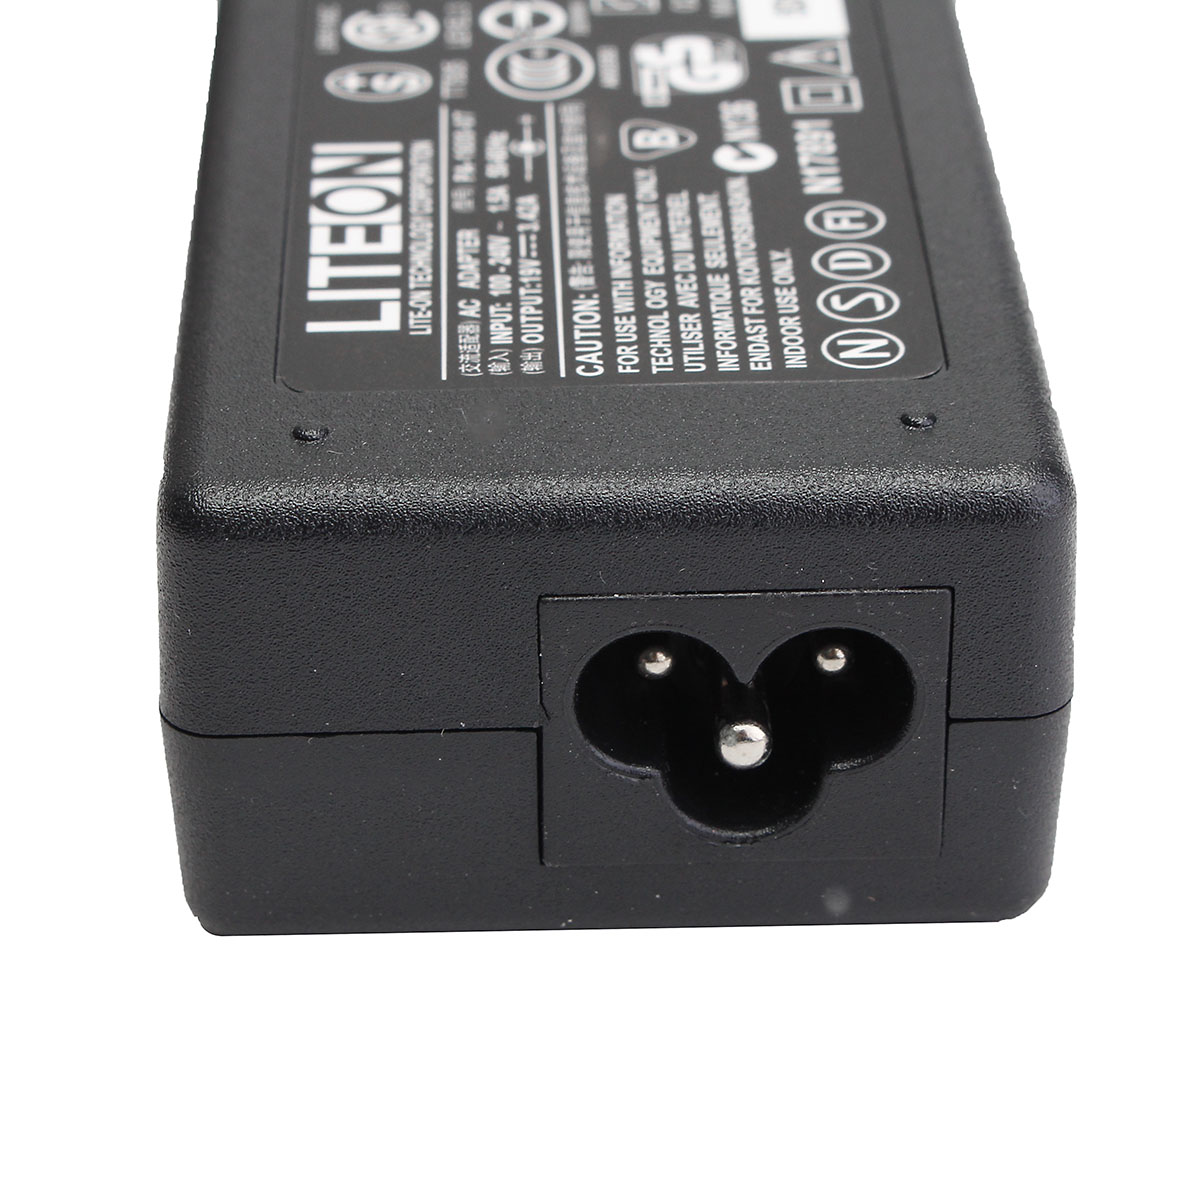 DC-19V-342A--Power-Adapter-Universal-Power-Supply-Charger-USEU-Plug-1363367-5